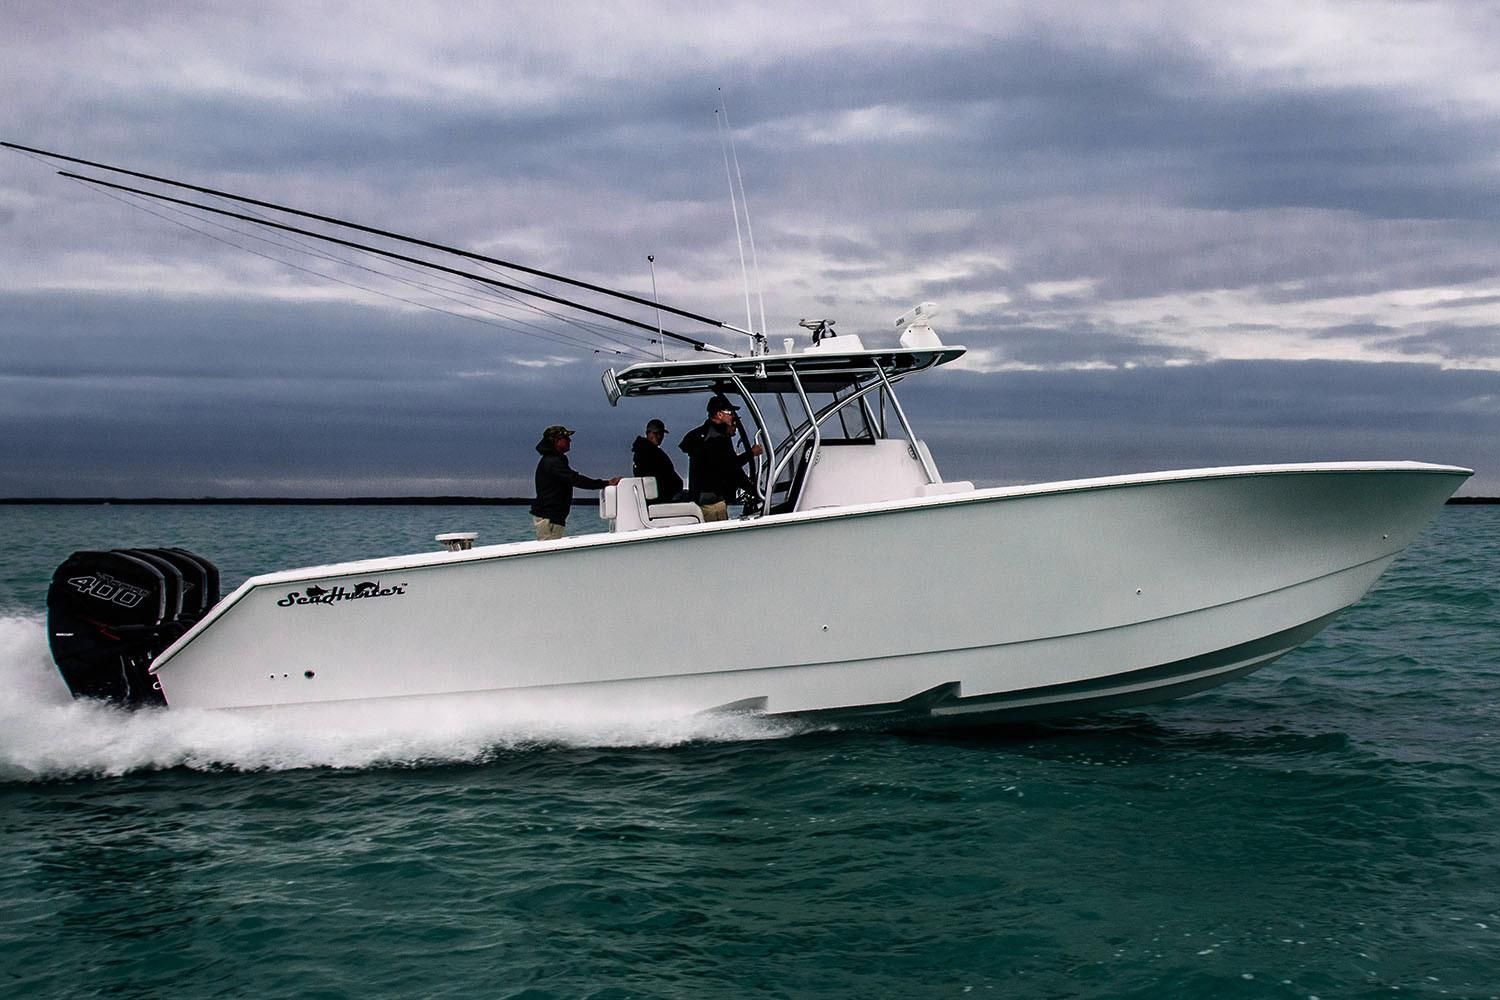 2019 SeaHunter CTS 41 Power Boat For Sale - www.yachtworld.com